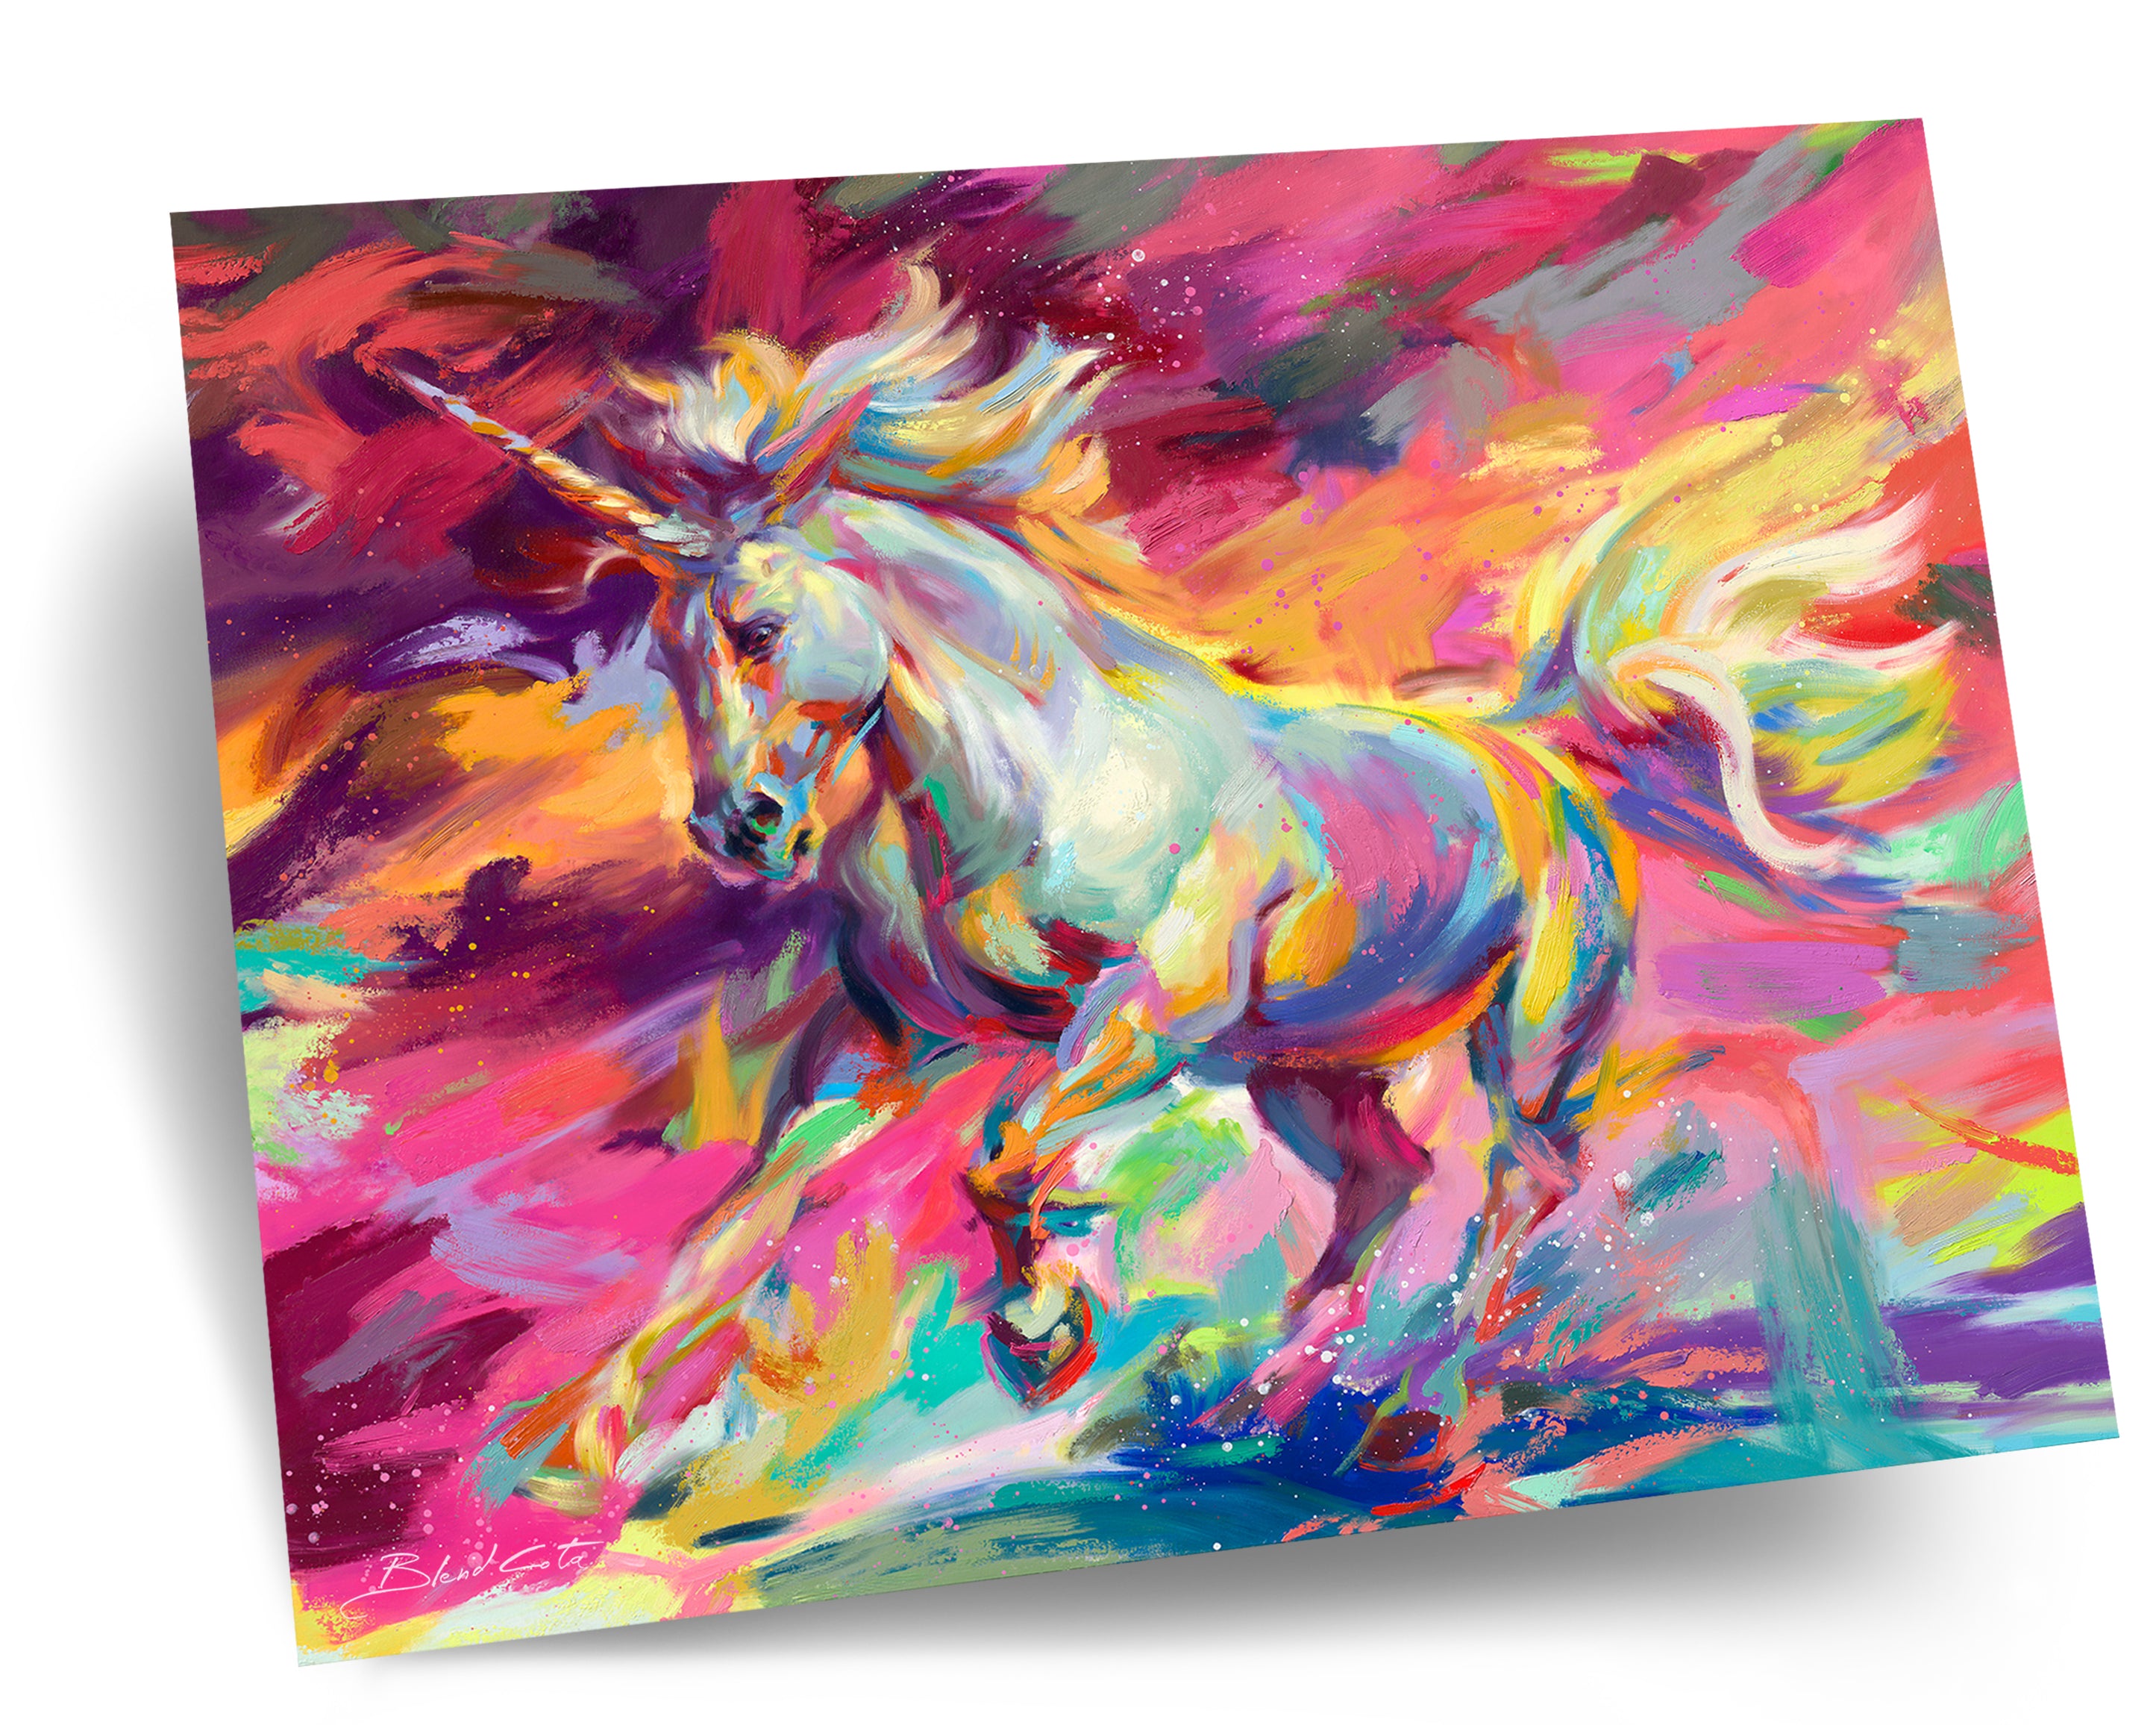 The free unicorn, full of color from the whole rainbow, a proud and mythical creature, majestically painting with beautiful strong brushstrokes.